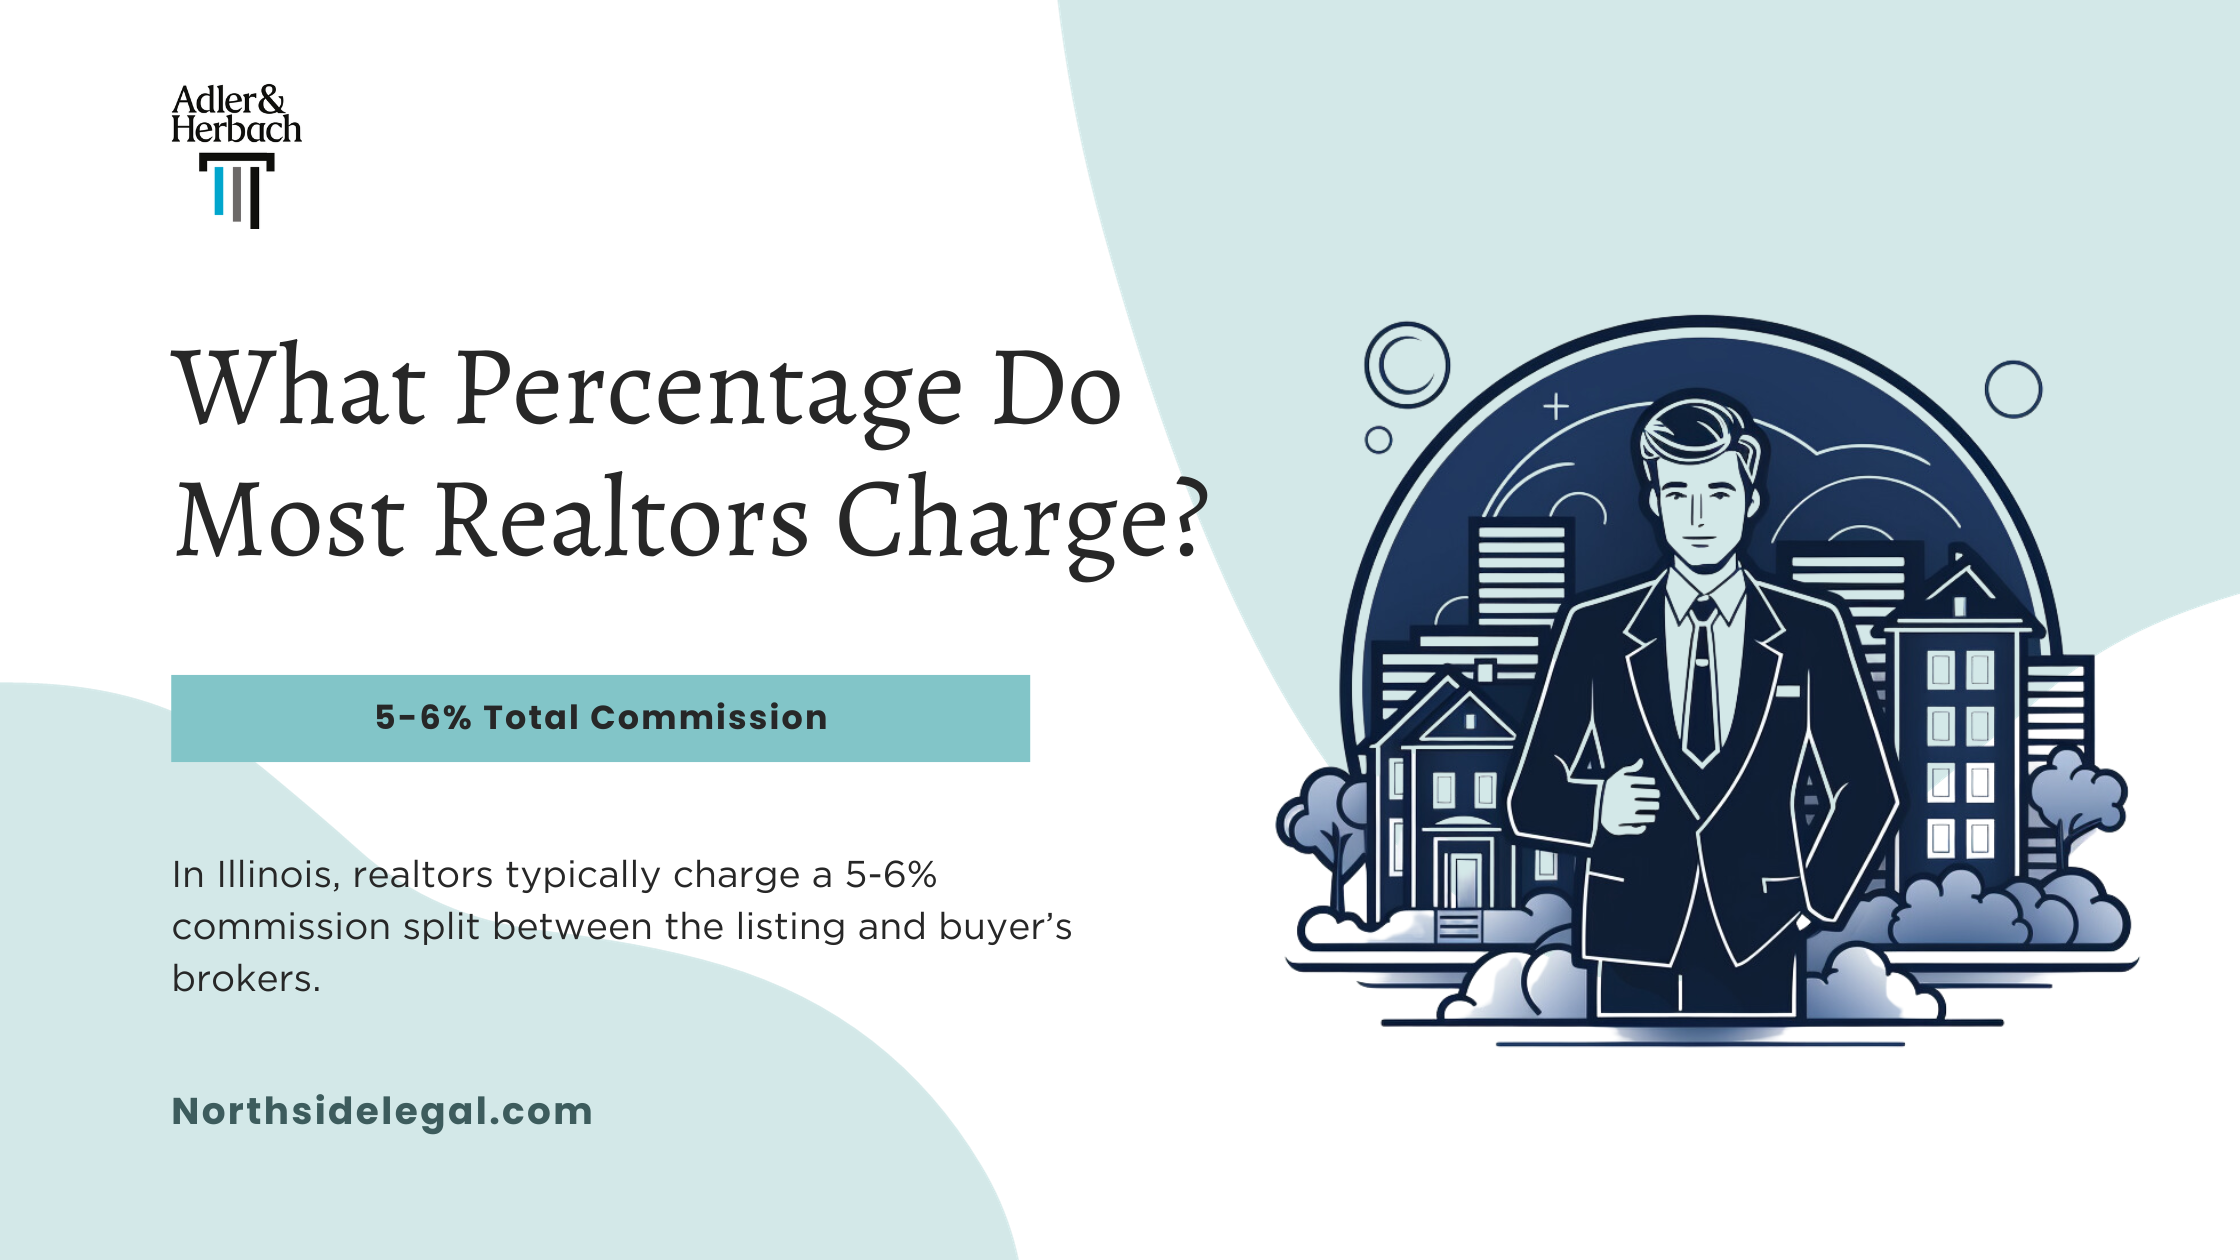 What Percentage Do Most Realtors Charge in Illinois?